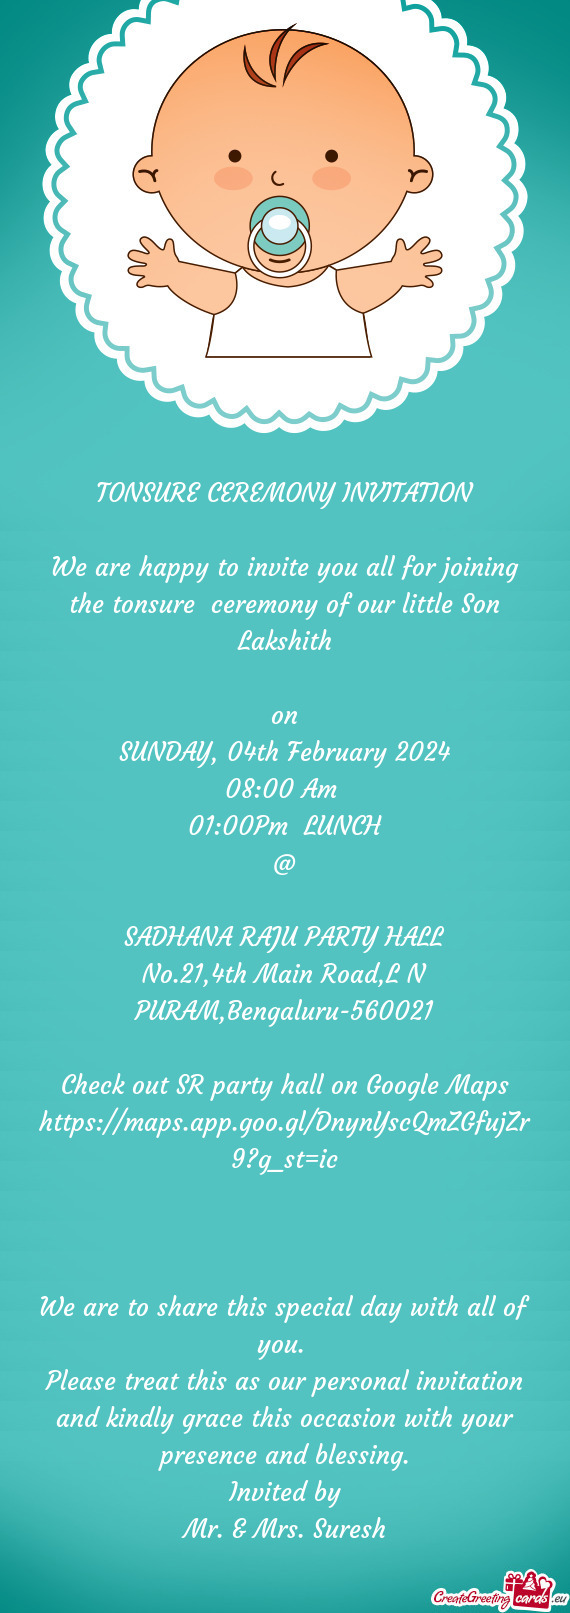 We are happy to invite you all for joining the tonsure ceremony of our little Son Lakshith